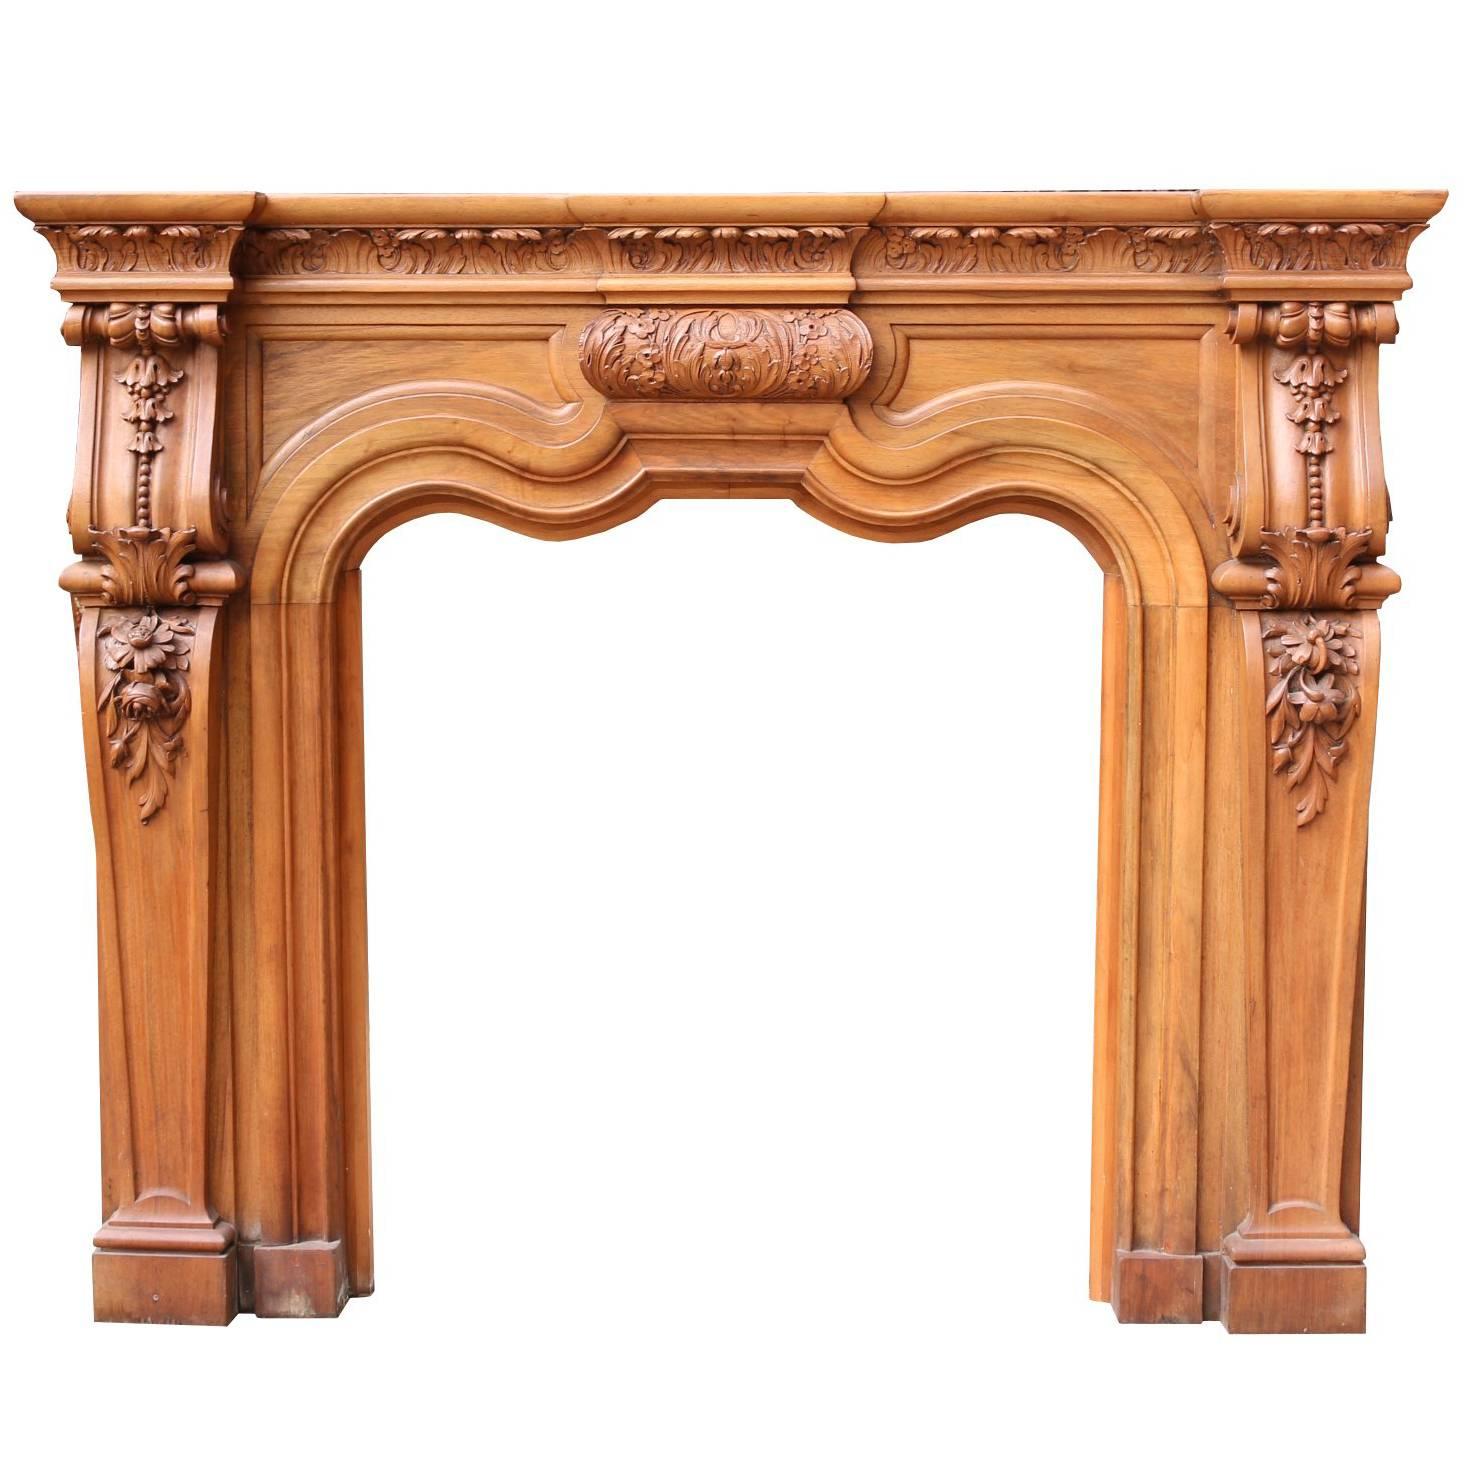 Early 20th Century Carved Walnut Fire Surround